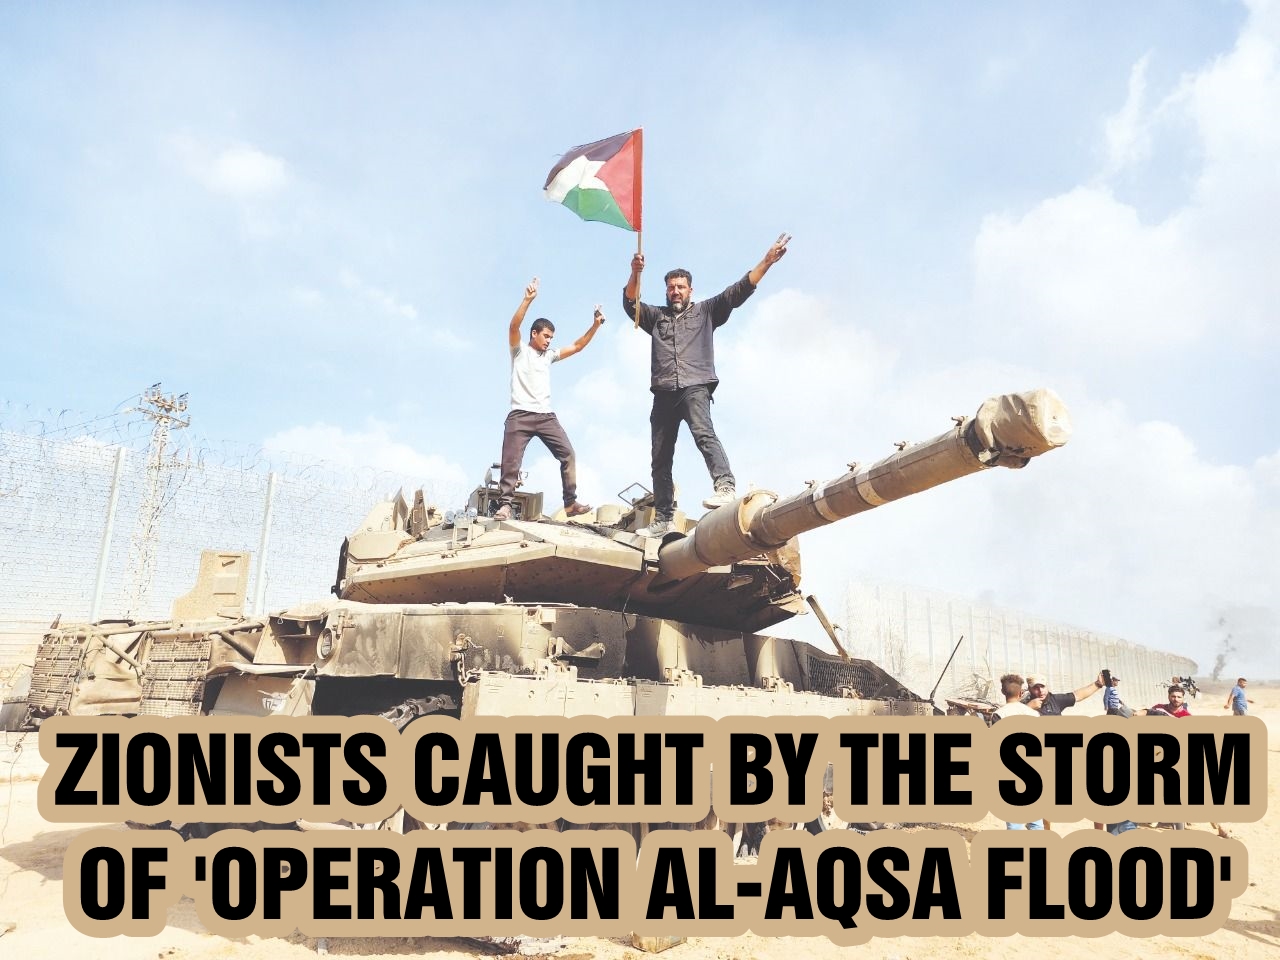 Zionists caught by the storm of 'Operation al-Aqsa Flood'